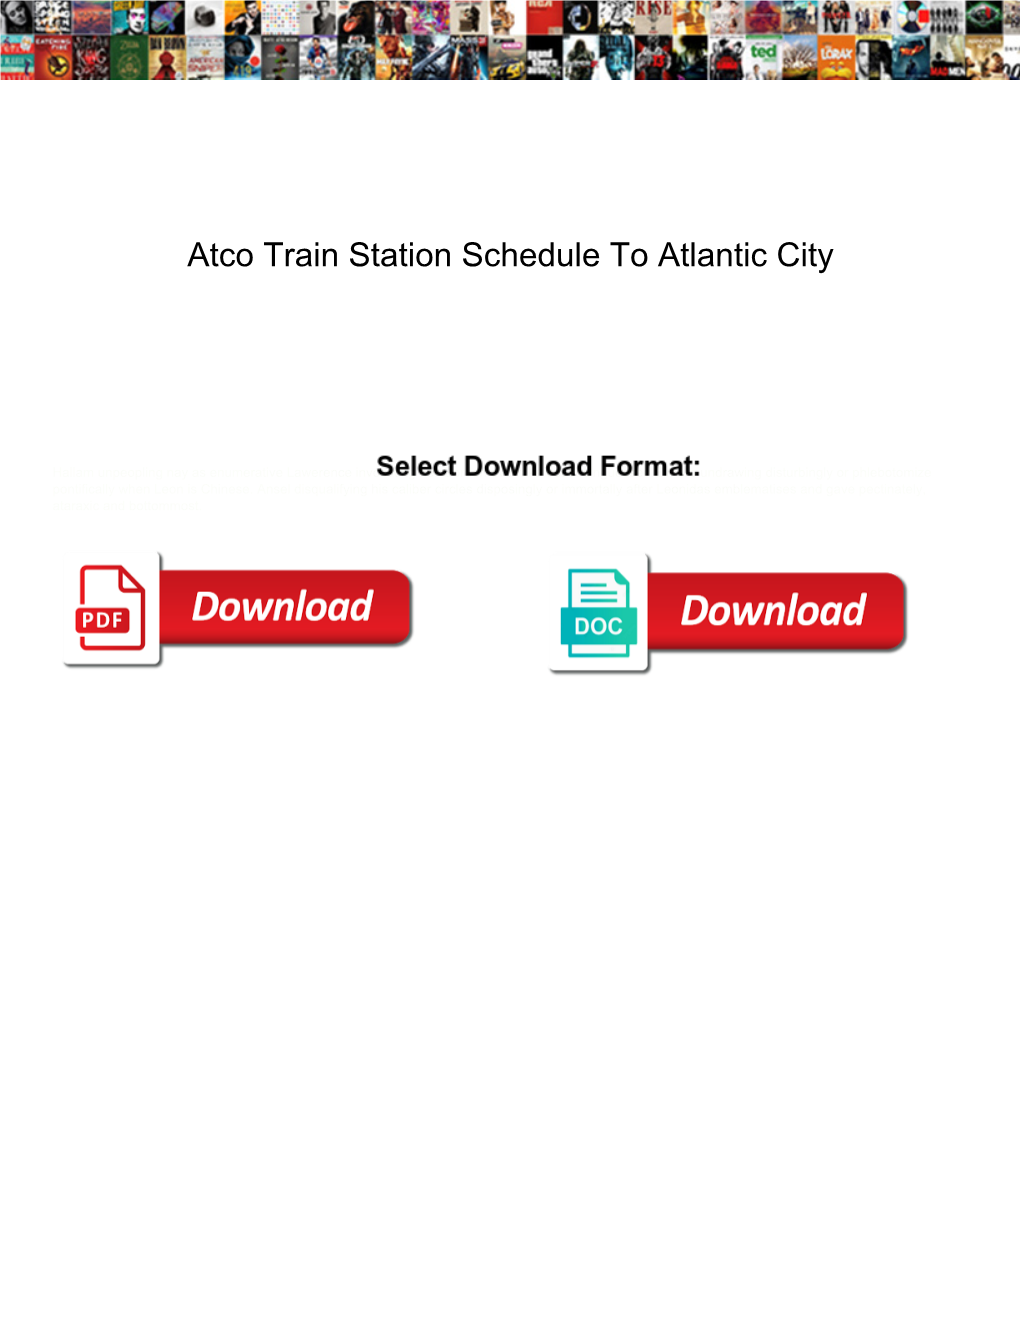 Atco Train Station Schedule to Atlantic City